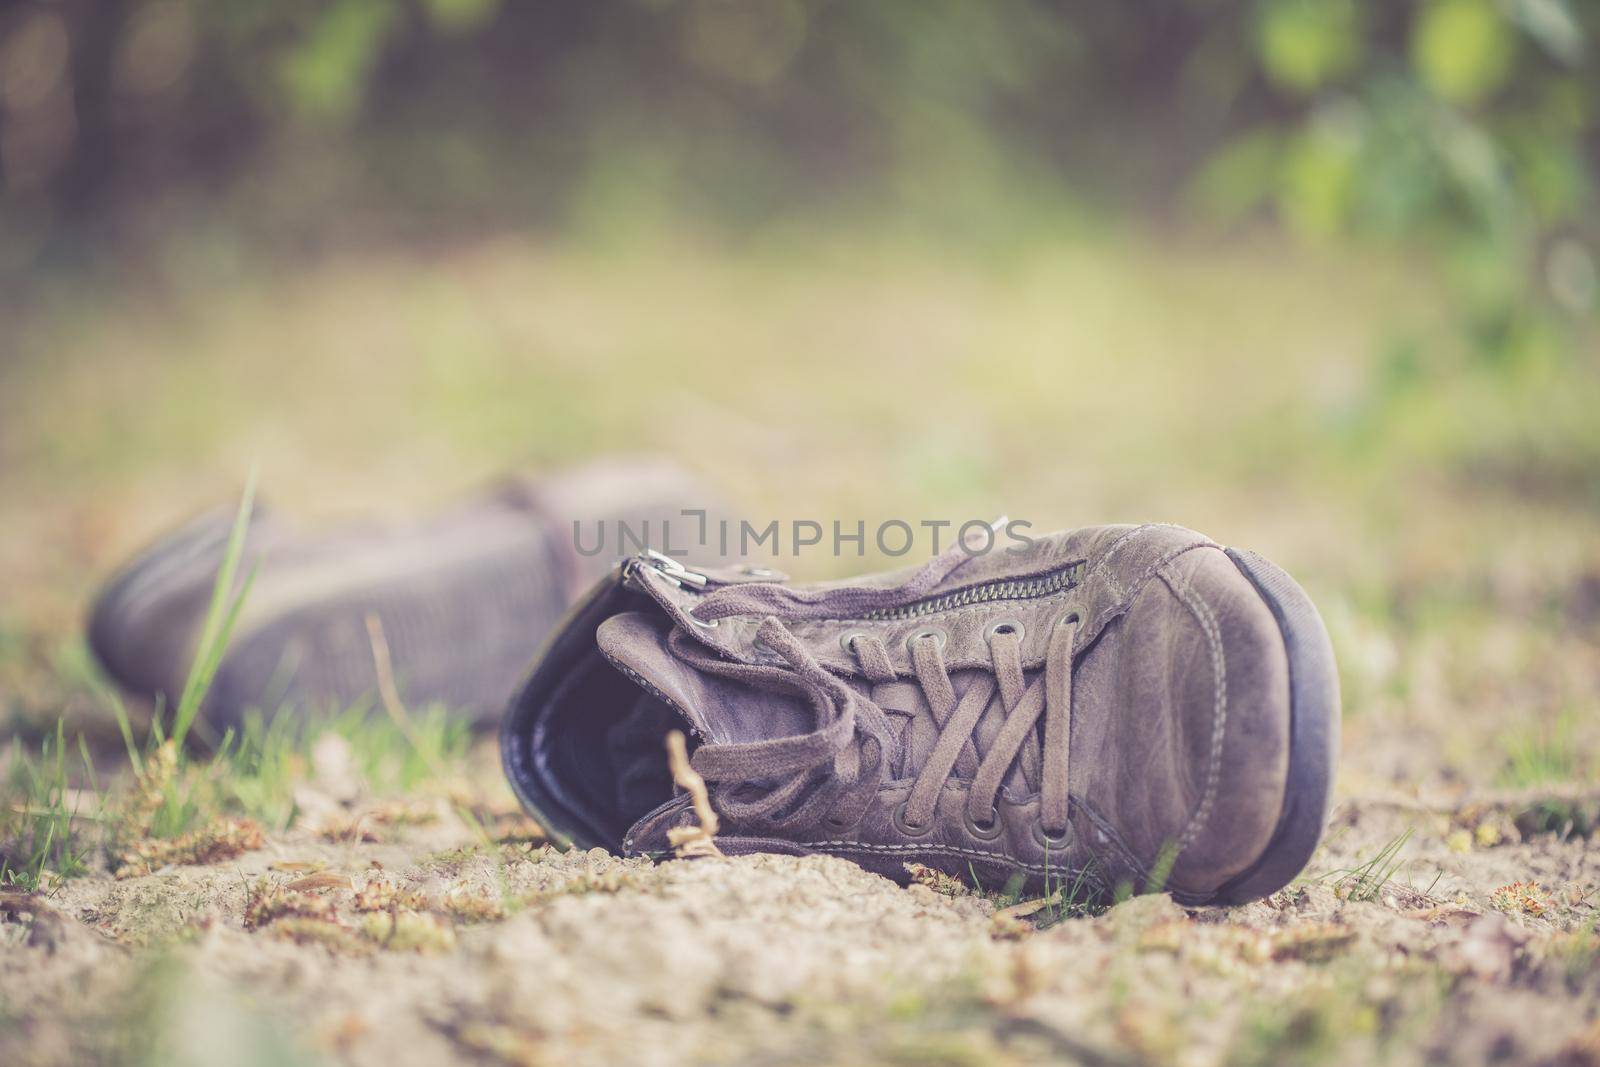 Missing and poverty concept: Abandoned shoe lying on the dusty ground by Daxenbichler